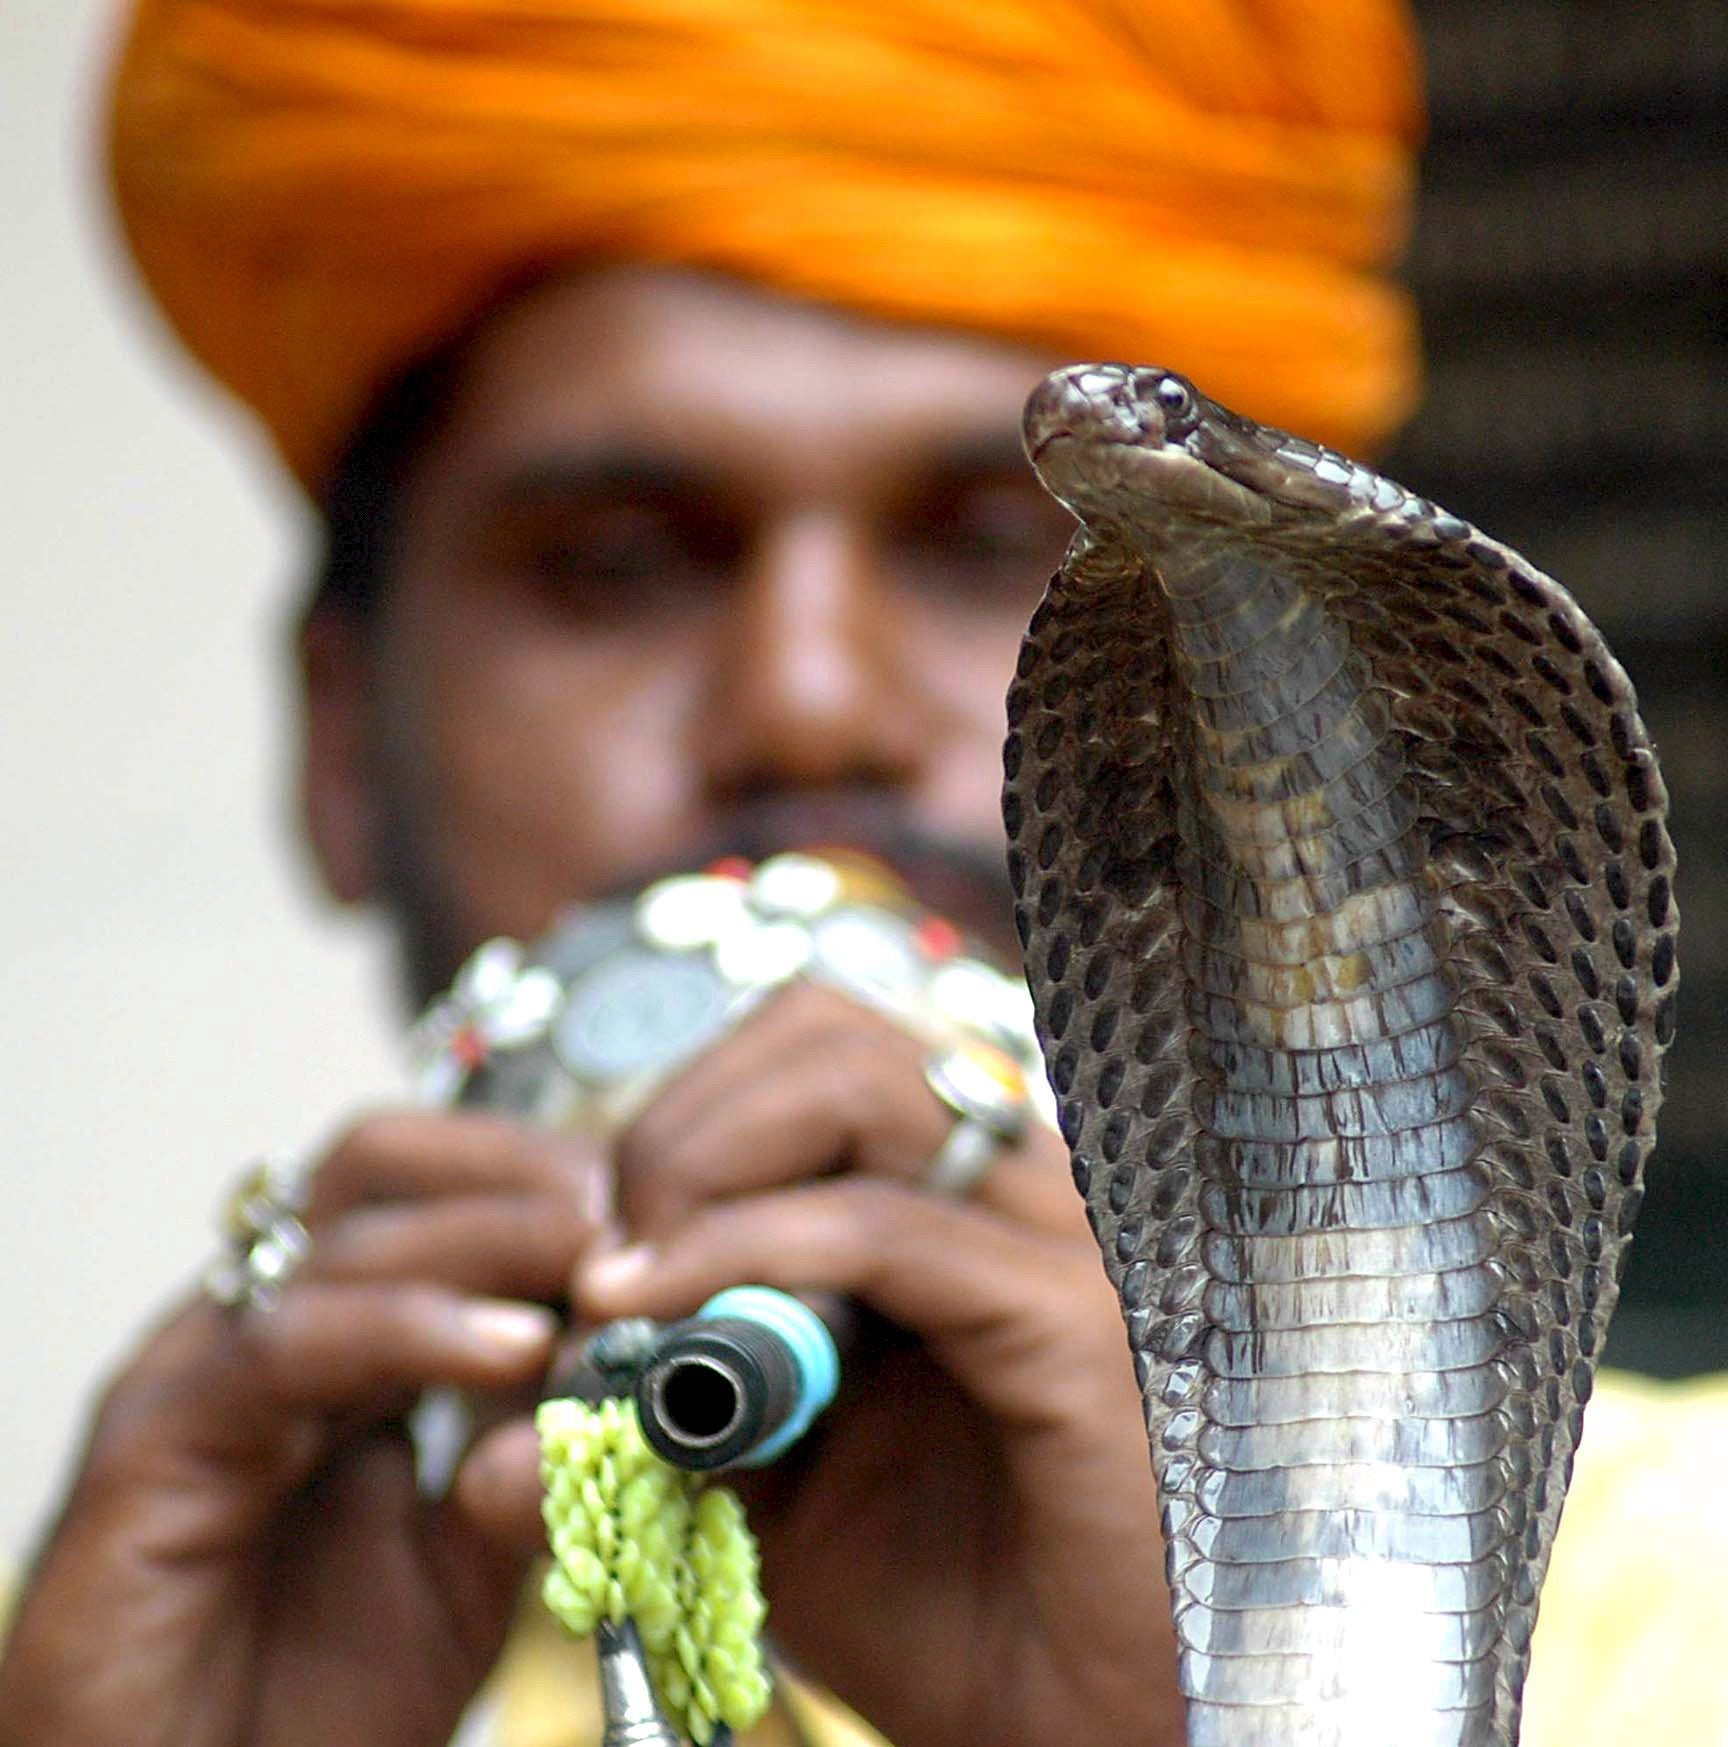 A snake charmer charms a snake in India